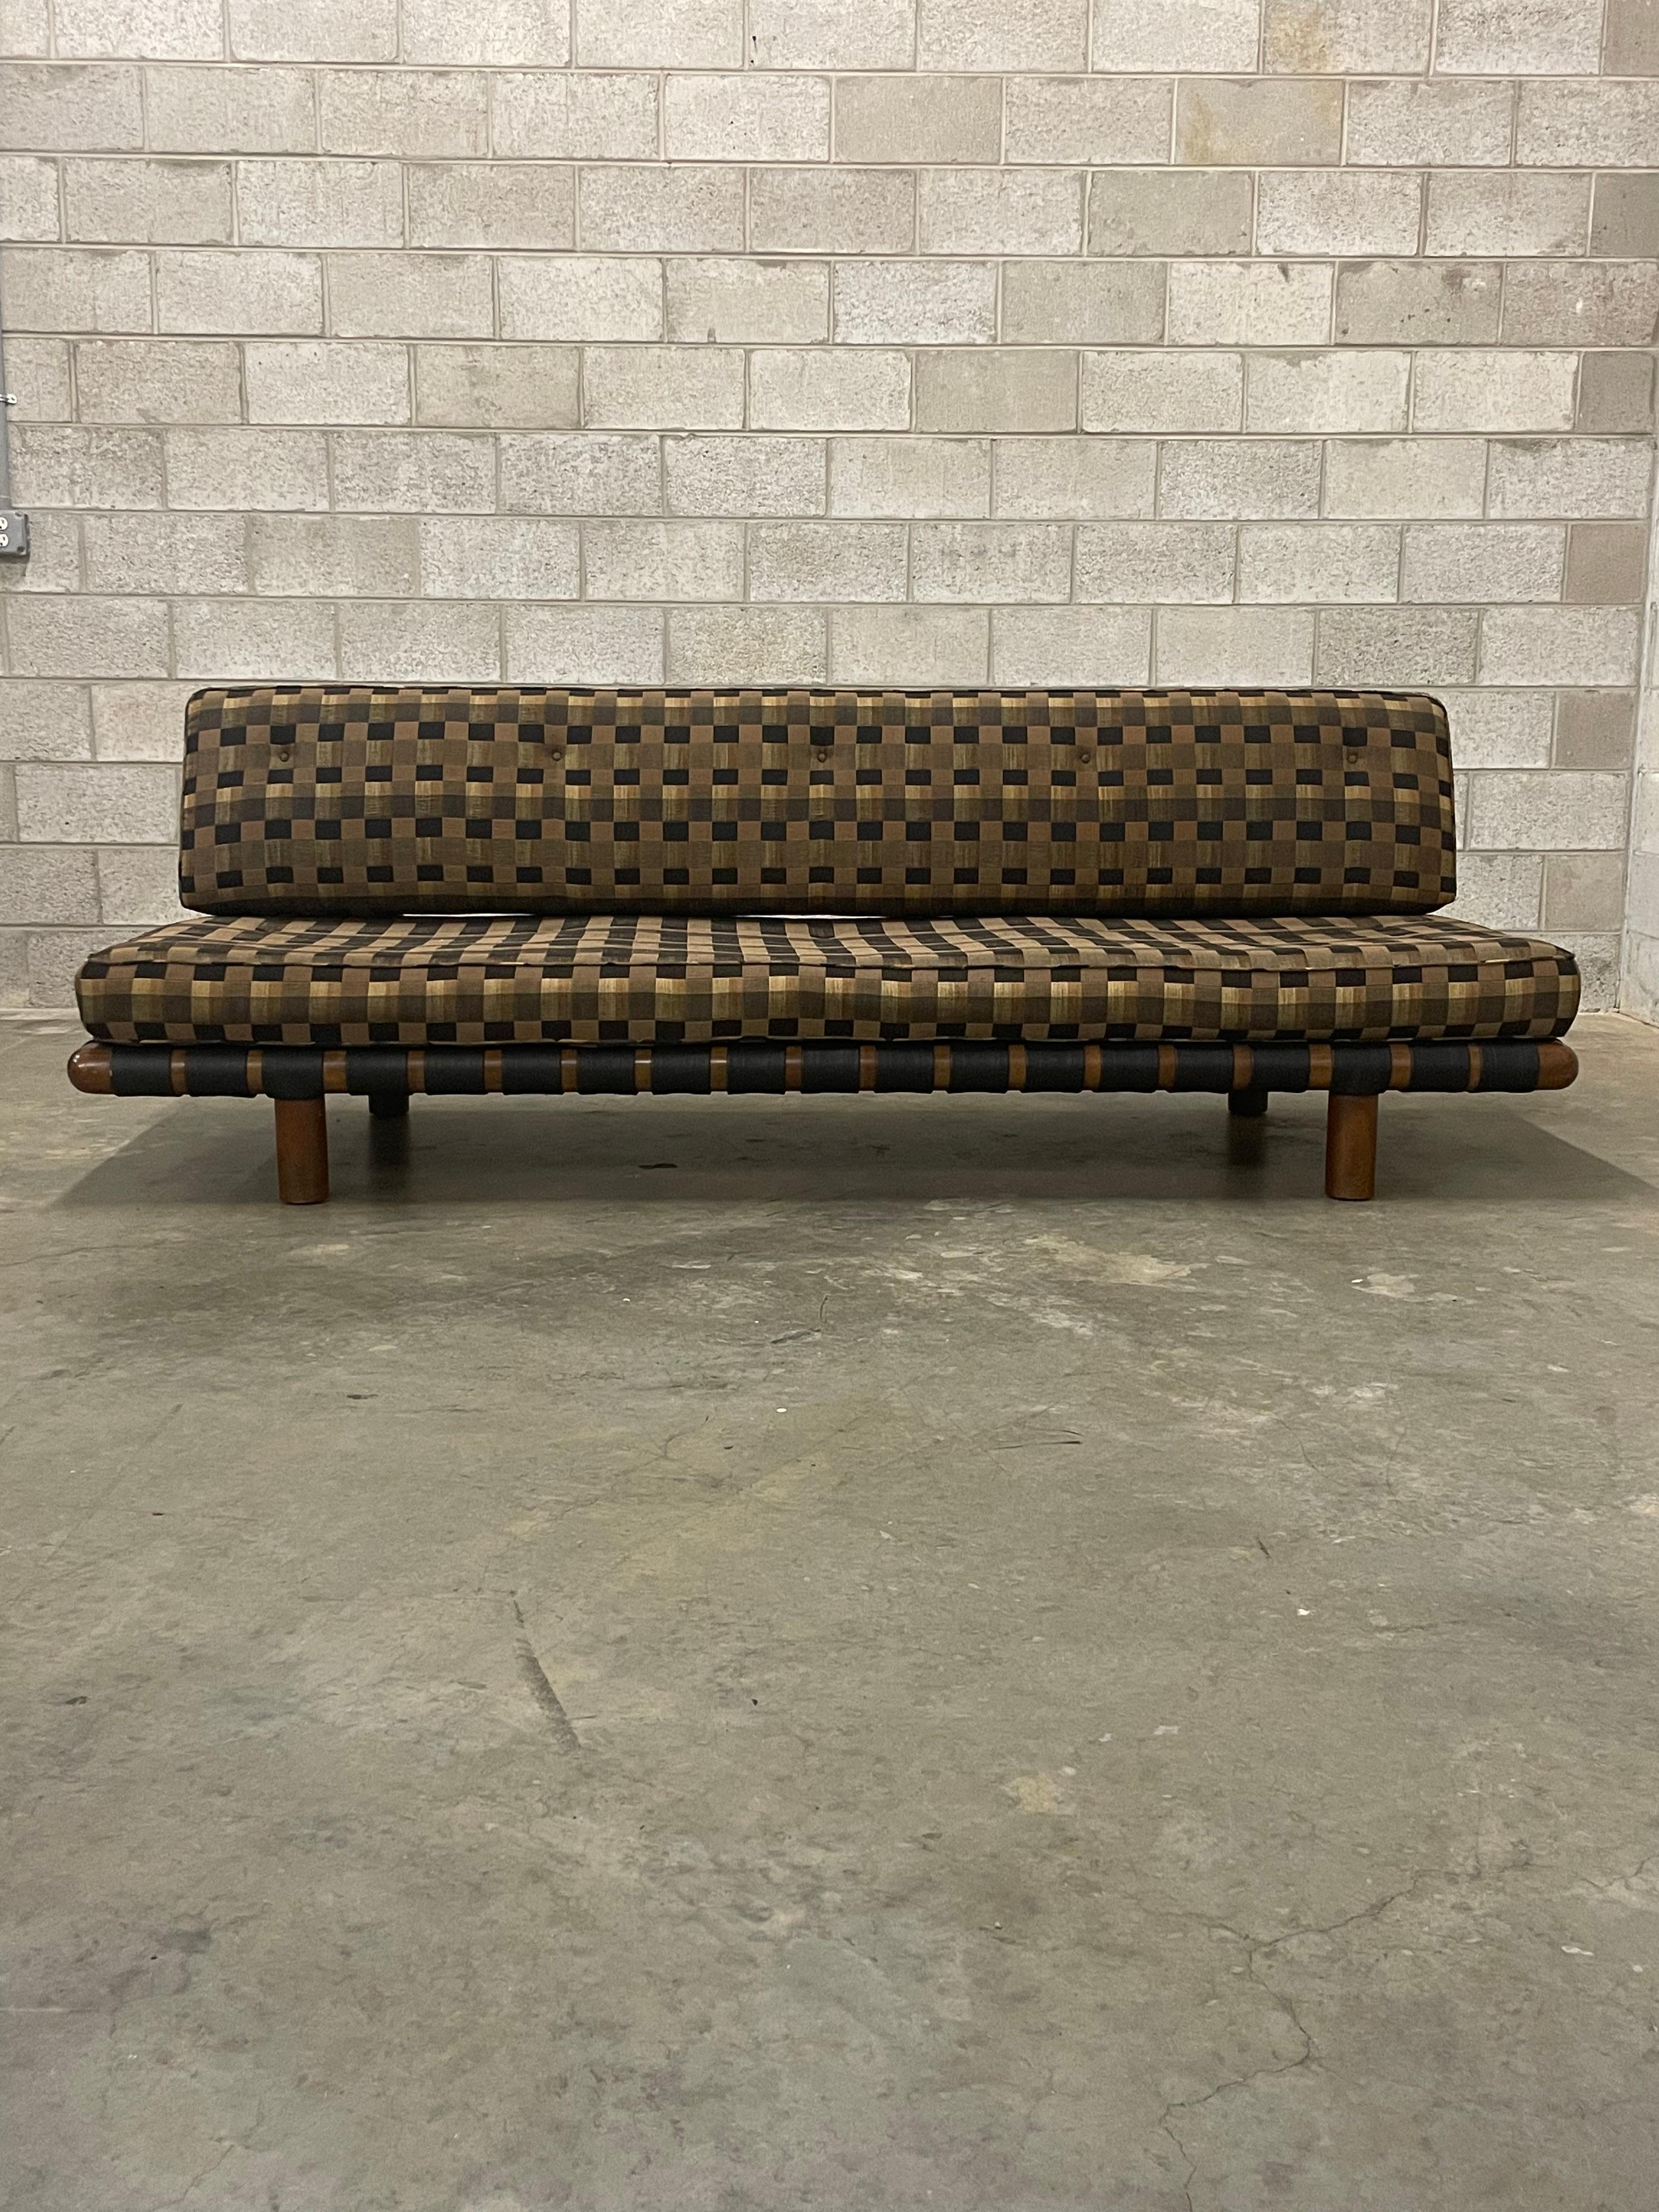 A wonderful, iconic, and rare sofa designed by T.H. Robsjohn-Gibbings for Widdicomb. Sofa has a minimalist silhouette while maintaining a sophisticated nature. Here is a rare opportunity to save on cost and transform one through reupholstery.